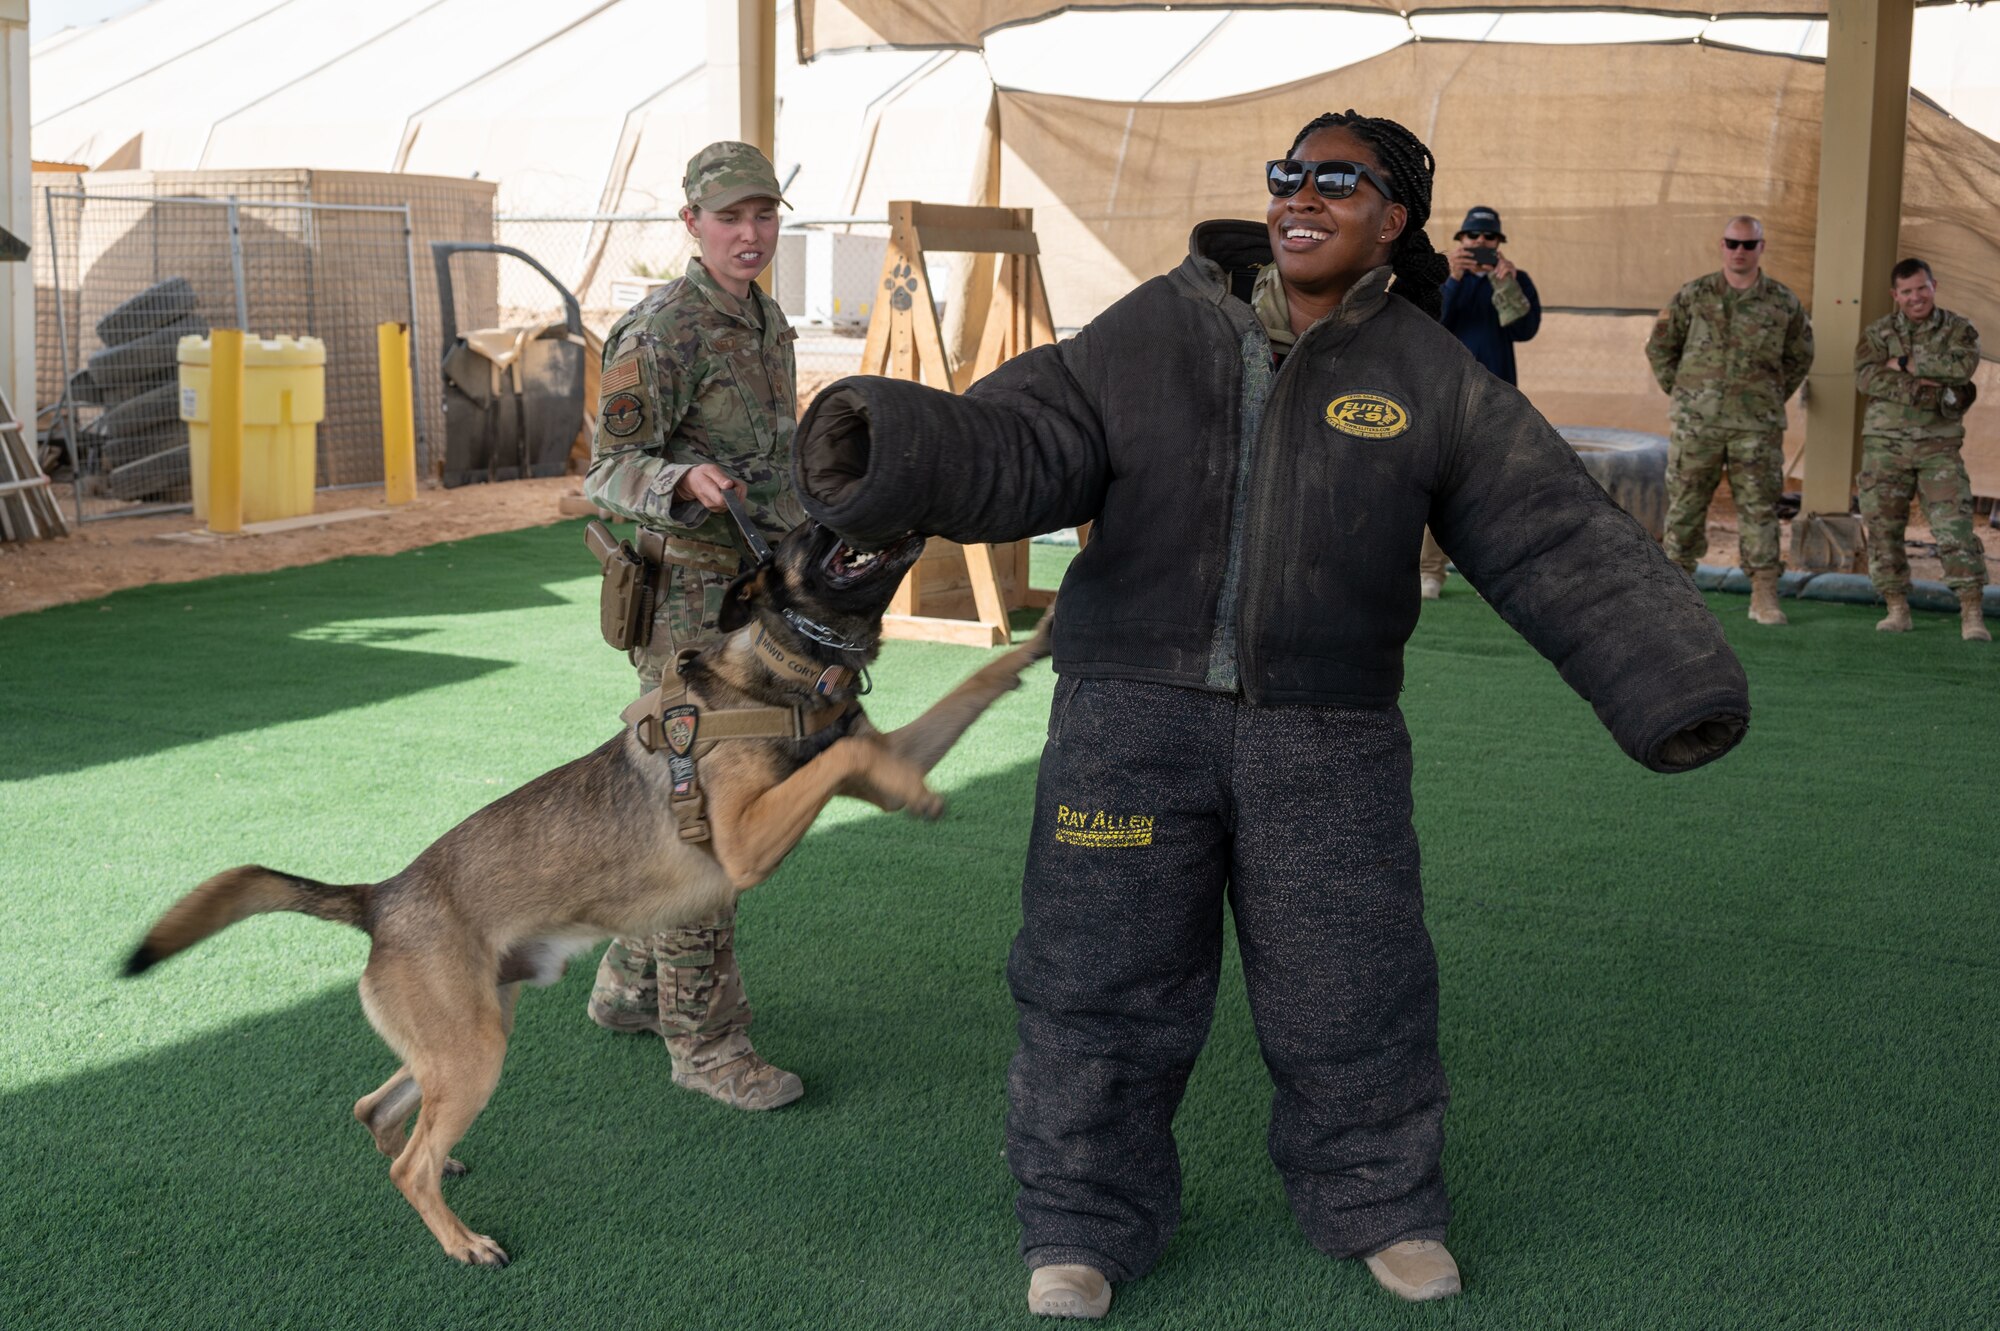 Staff Sgt. Hailey Goetz, 332d Expeditionary Security Forces Squadron military working dog handler, and her MWD, Cory, demonstrate their team’s effectiveness against a simulated perpetrator to 332d Air Expeditionary Wing Airmen at an undisclosed location in Southwest Asia, April 26, 2022. MWD demonstrations are a validation of readiness and a chance for MWDs to exercise their training. (U.S Air Force photo by Tech. Sgt. Lauren M. Snyder)